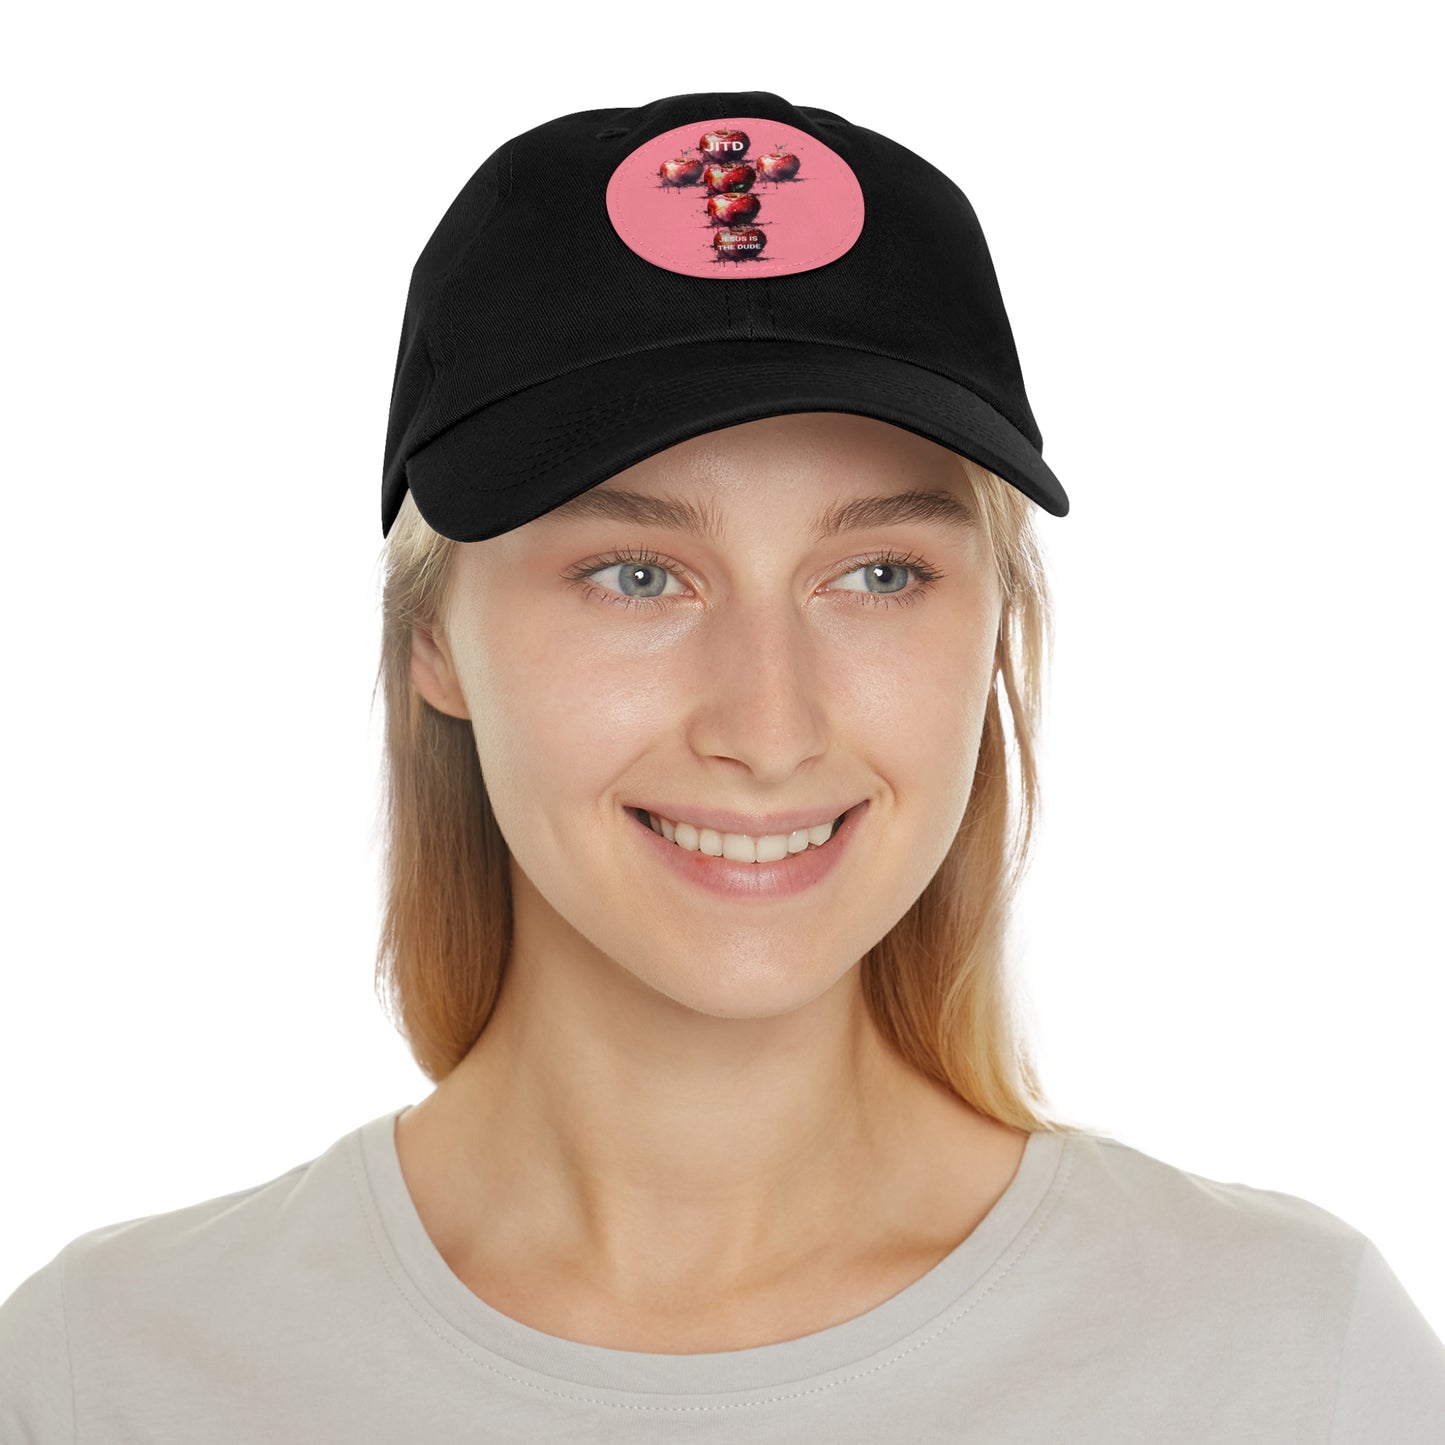 JITD APPLE CROSS HAT WITH LEATHER PATCH